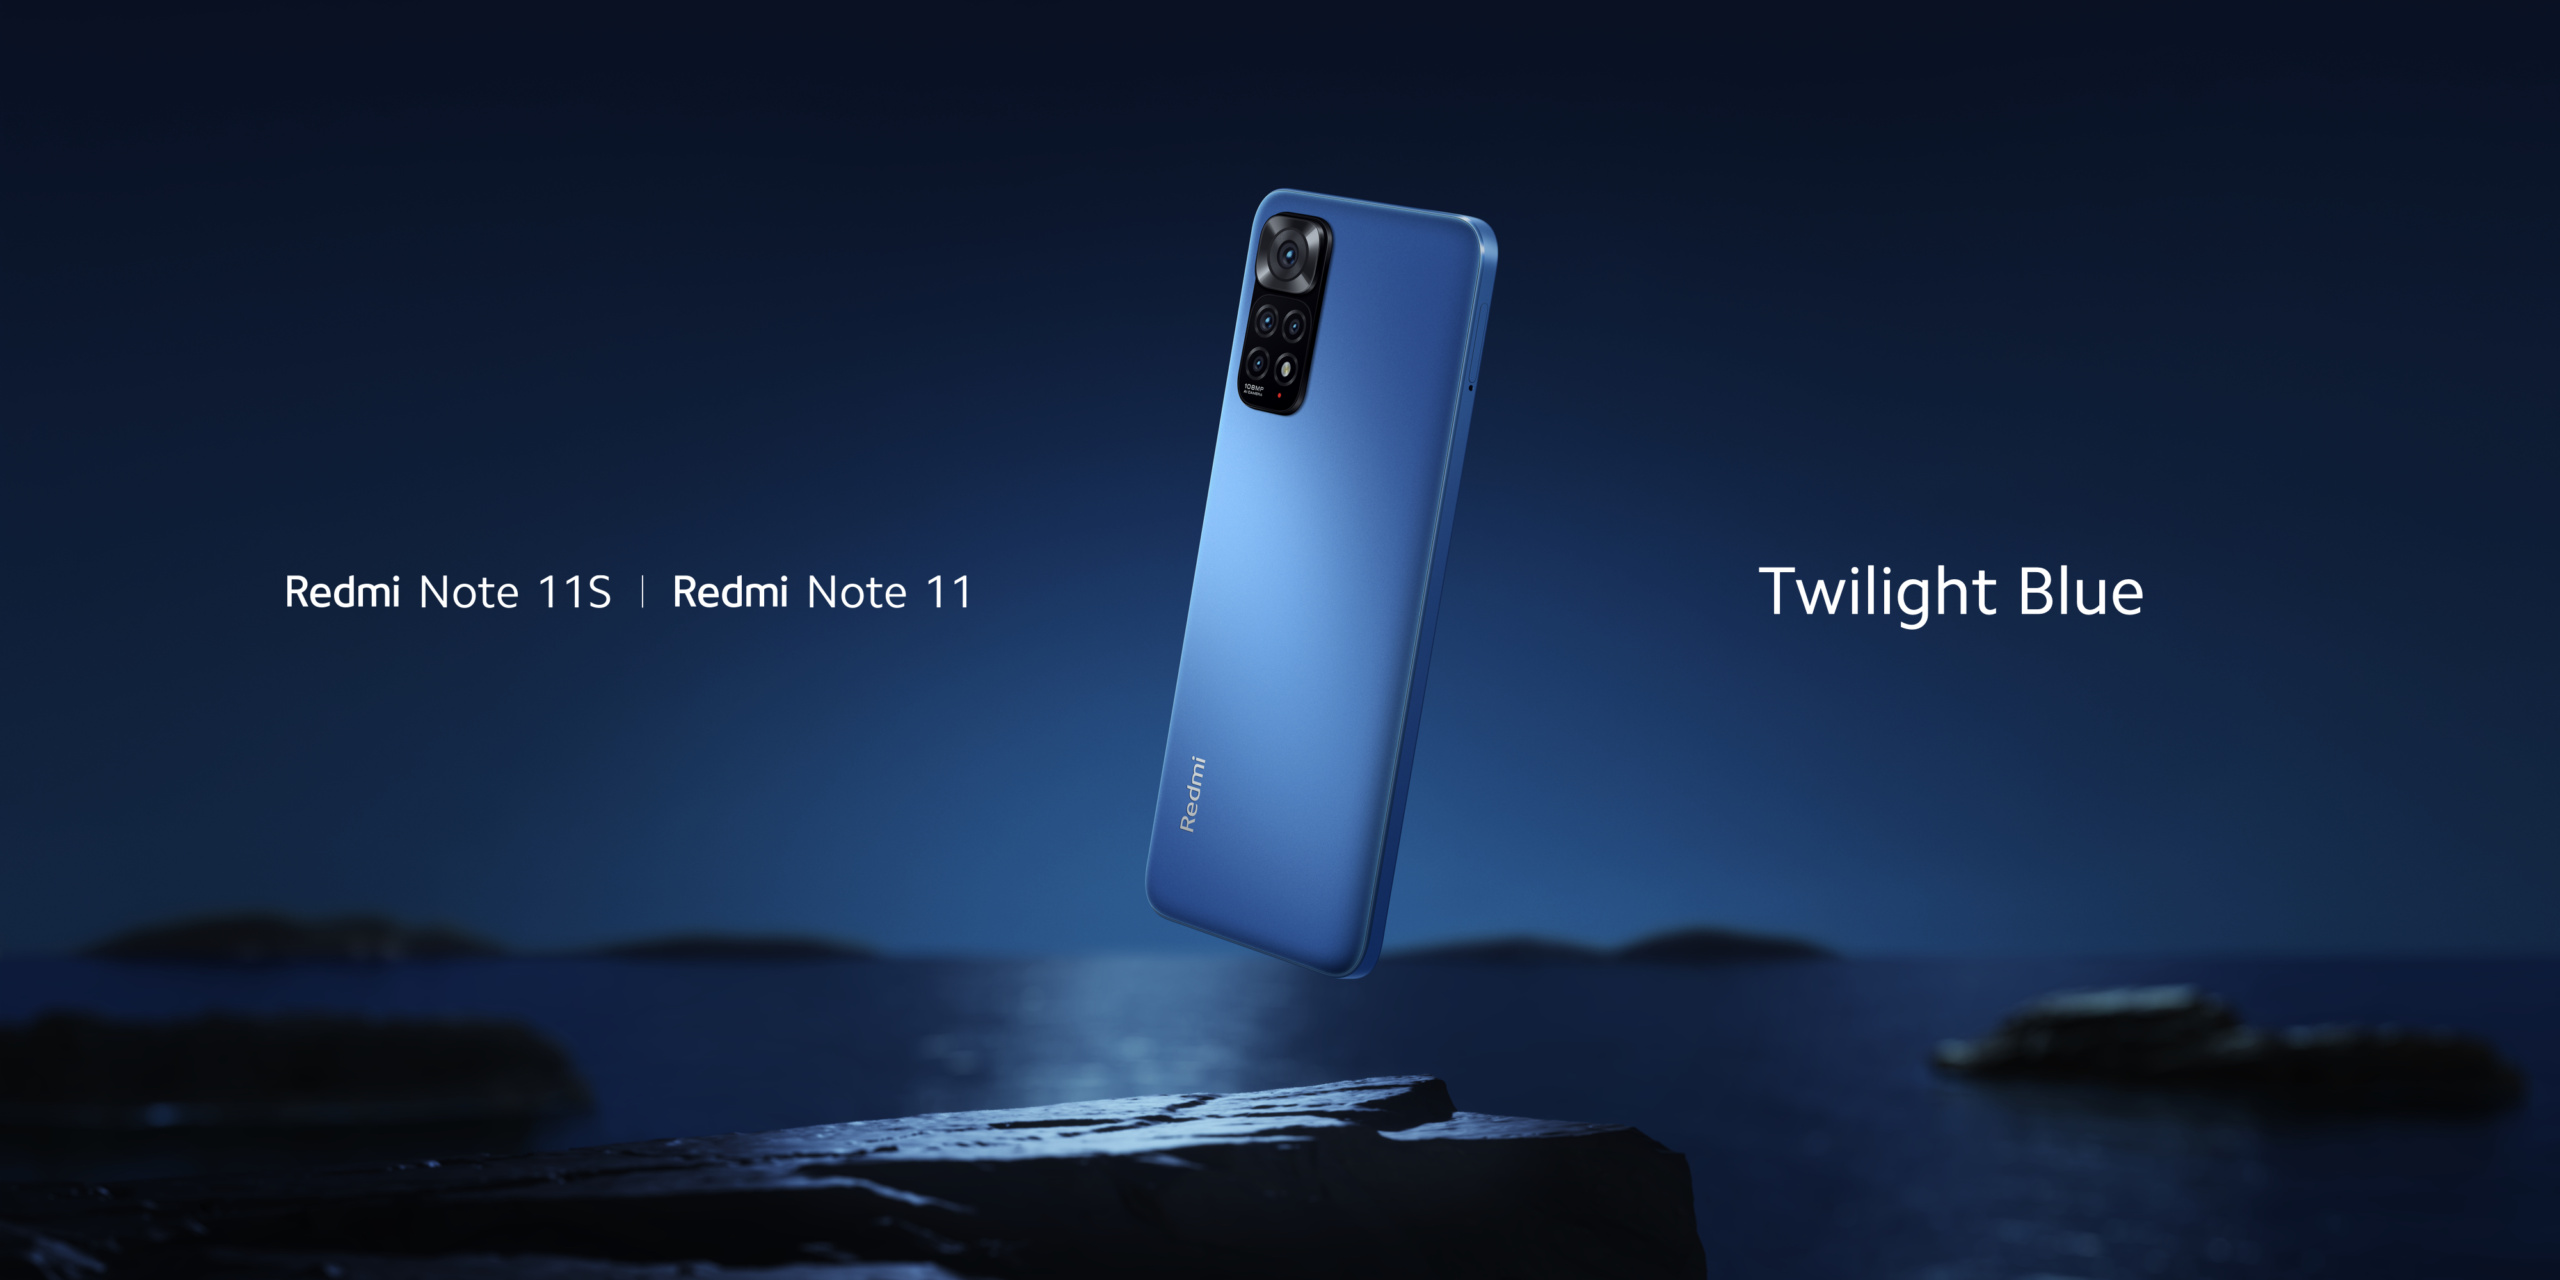 Xiaomi introduced new models Redmi Note 11 and Note 11S ⋆ 12